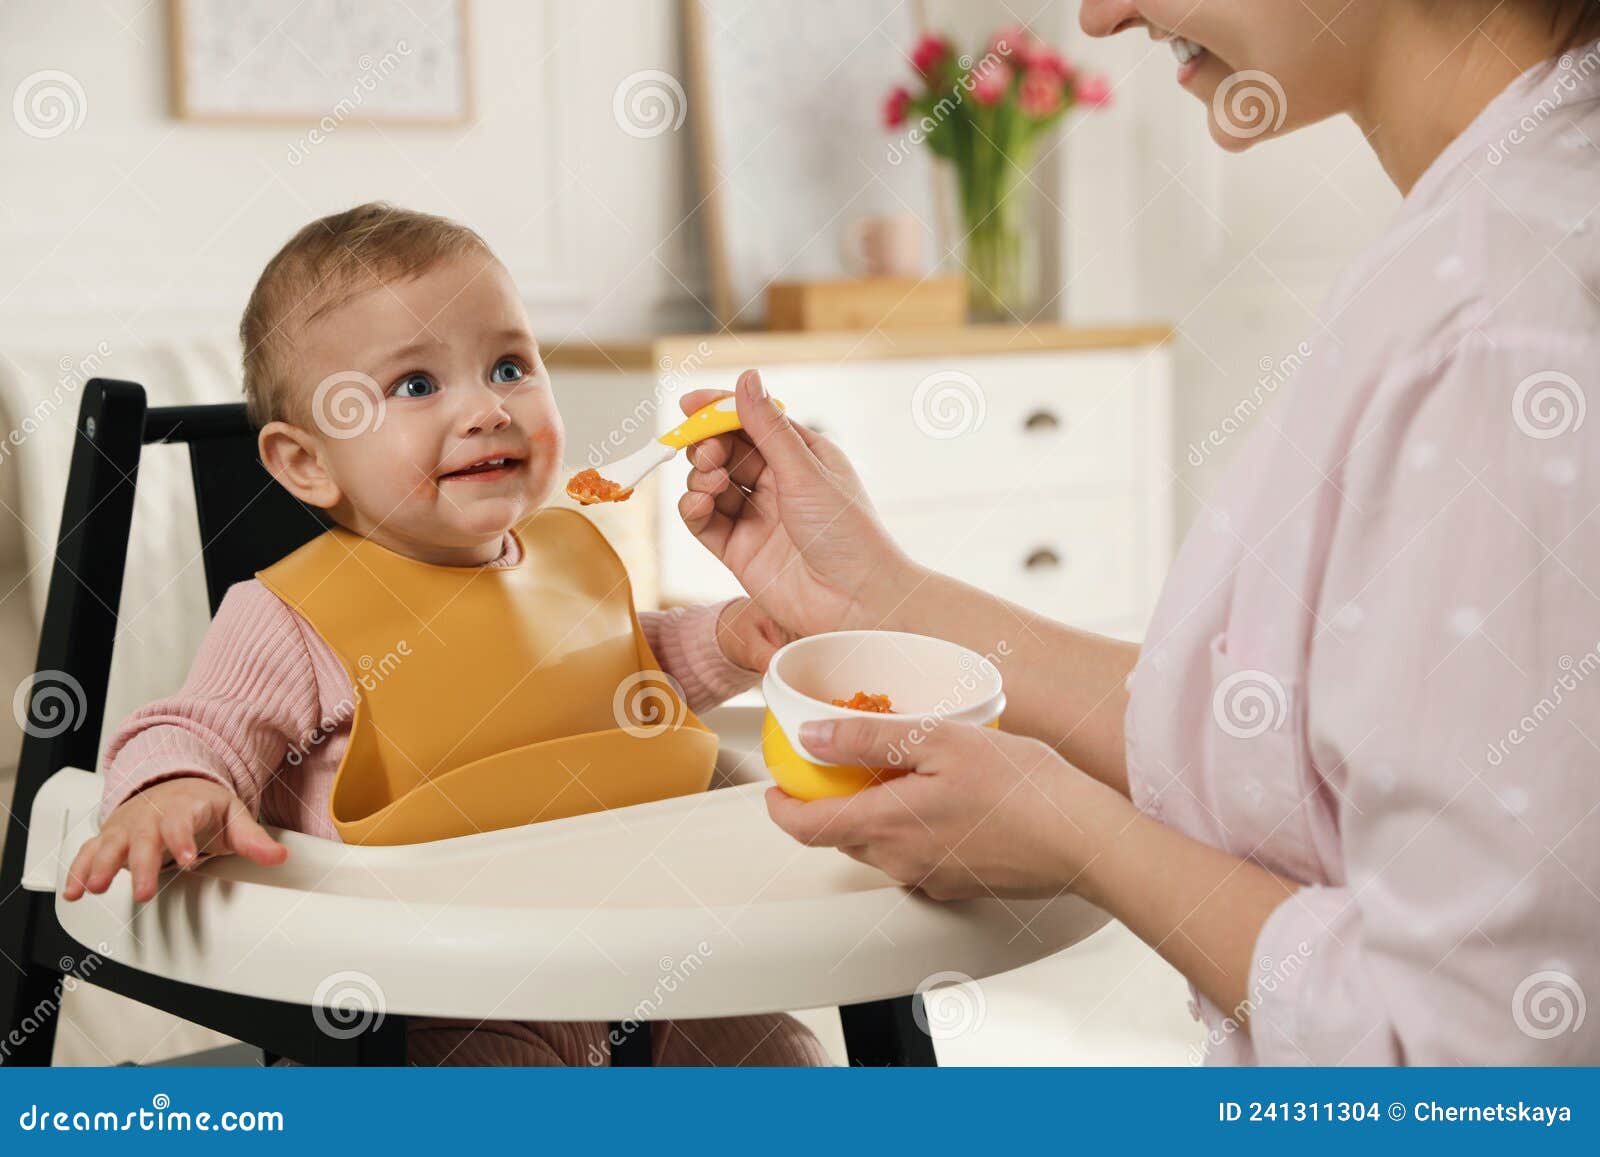 mother feeding her little baby at home. kid wearing silicone bib